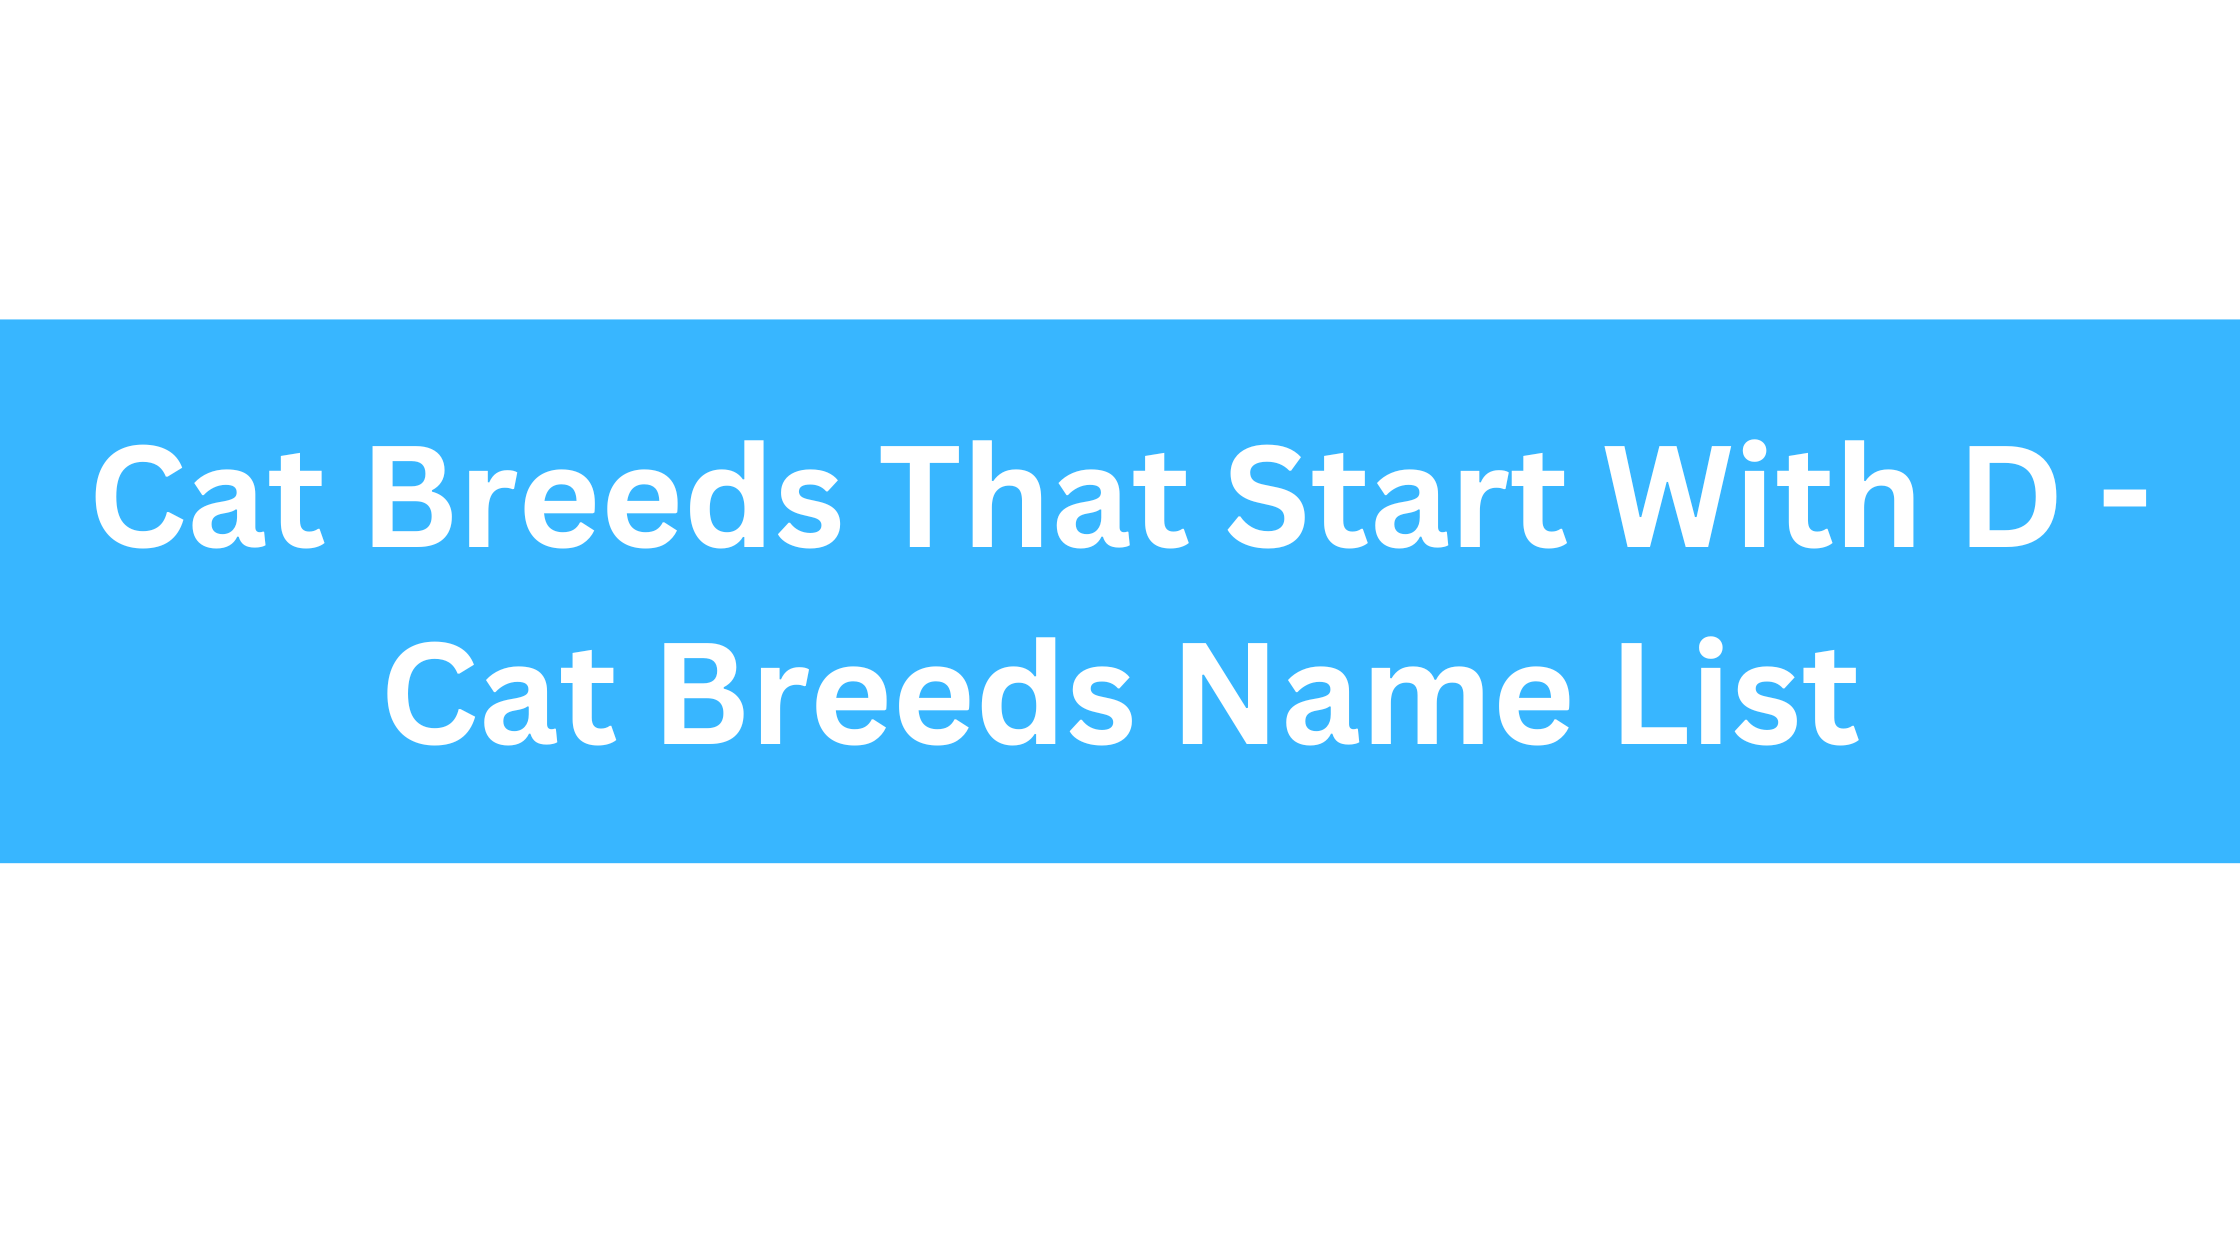 Cat Breeds That Start With D